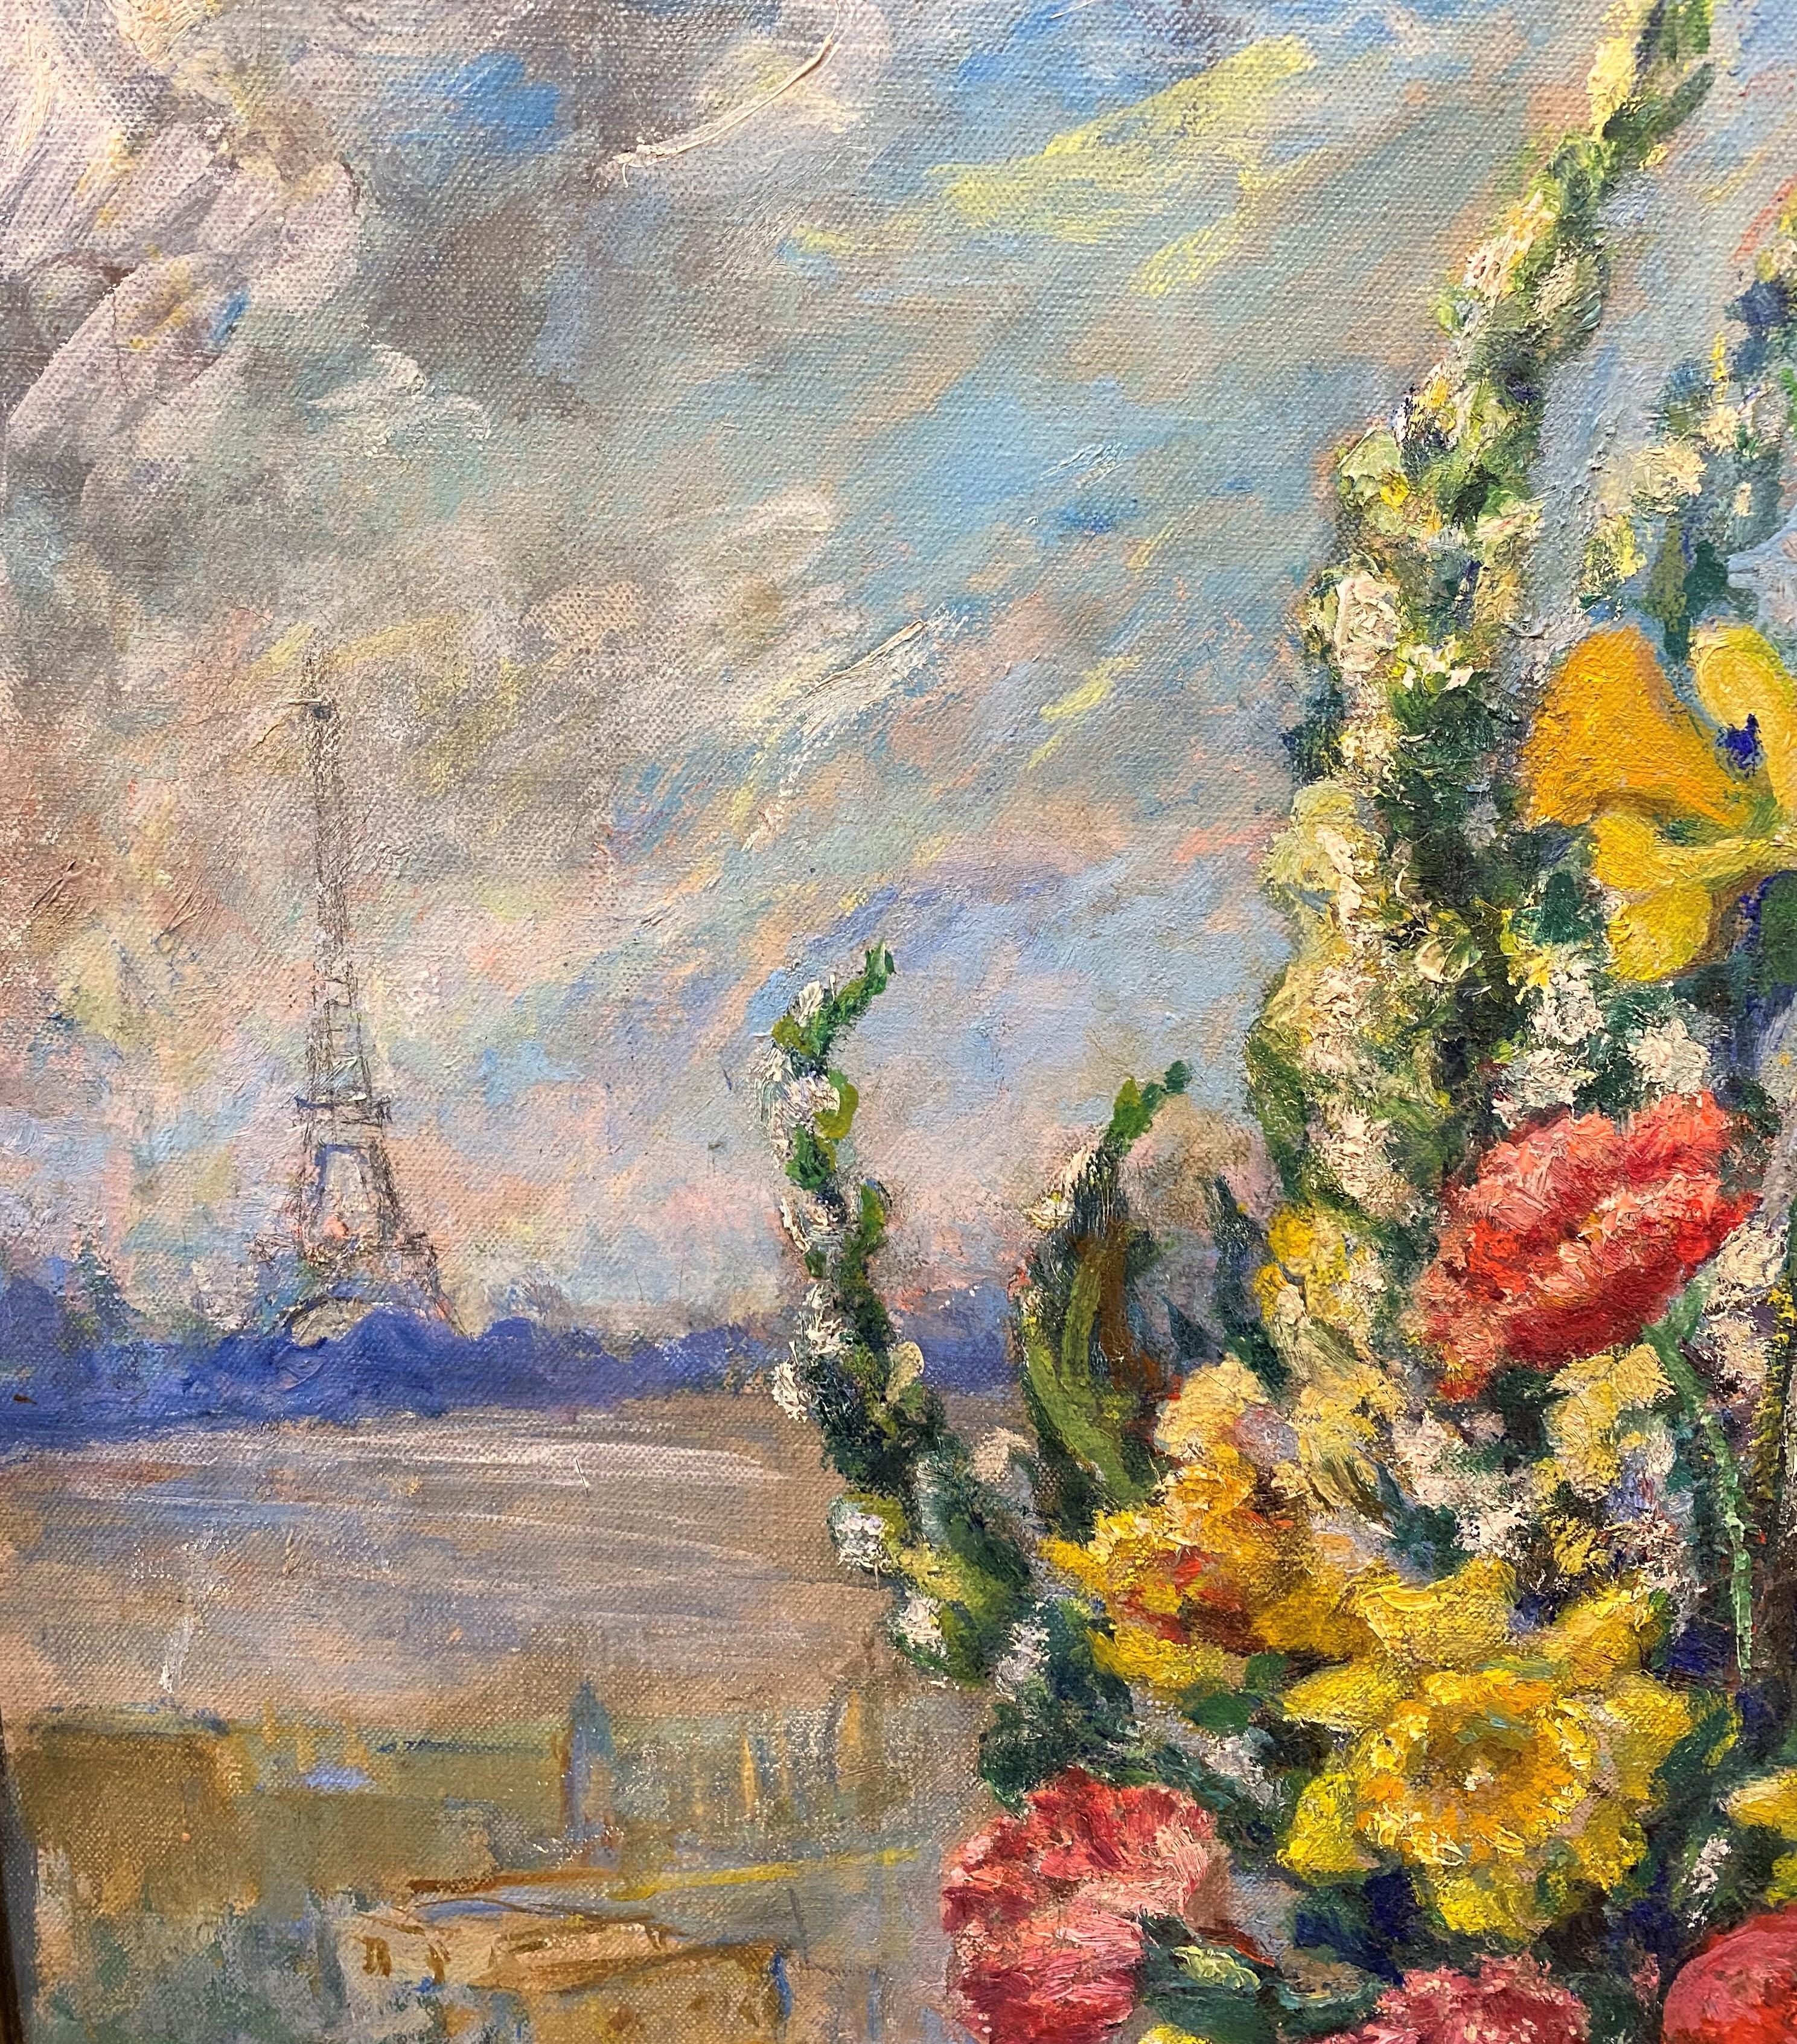 A fine still life with flowers in a vase with the Eiffel Tower in the background by American artist Mary Hutchinson Peixotto (1869-1956). Peixotto was born in San Francisco, studied in San Francisco at the School of Design under Emil Carisen and